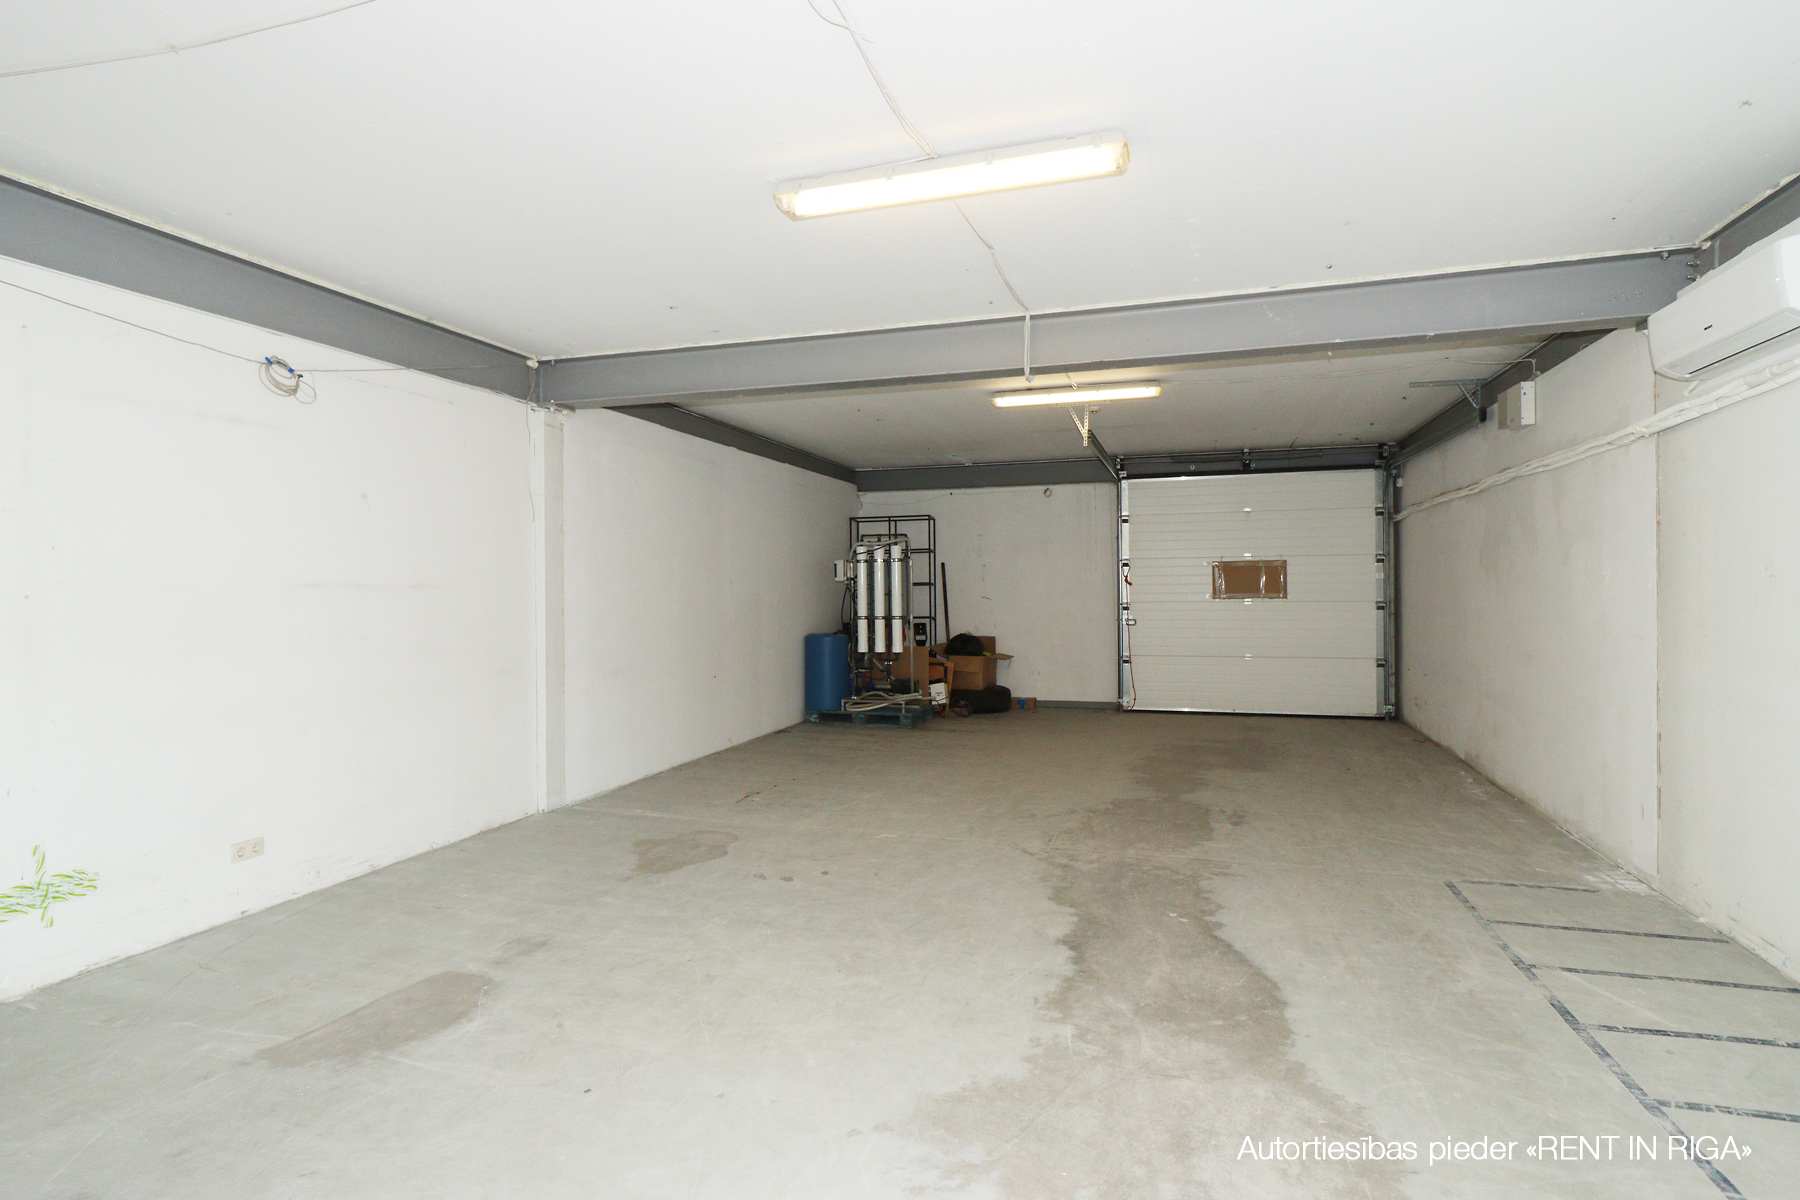 Retail premises for rent, Straupes street - Image 1